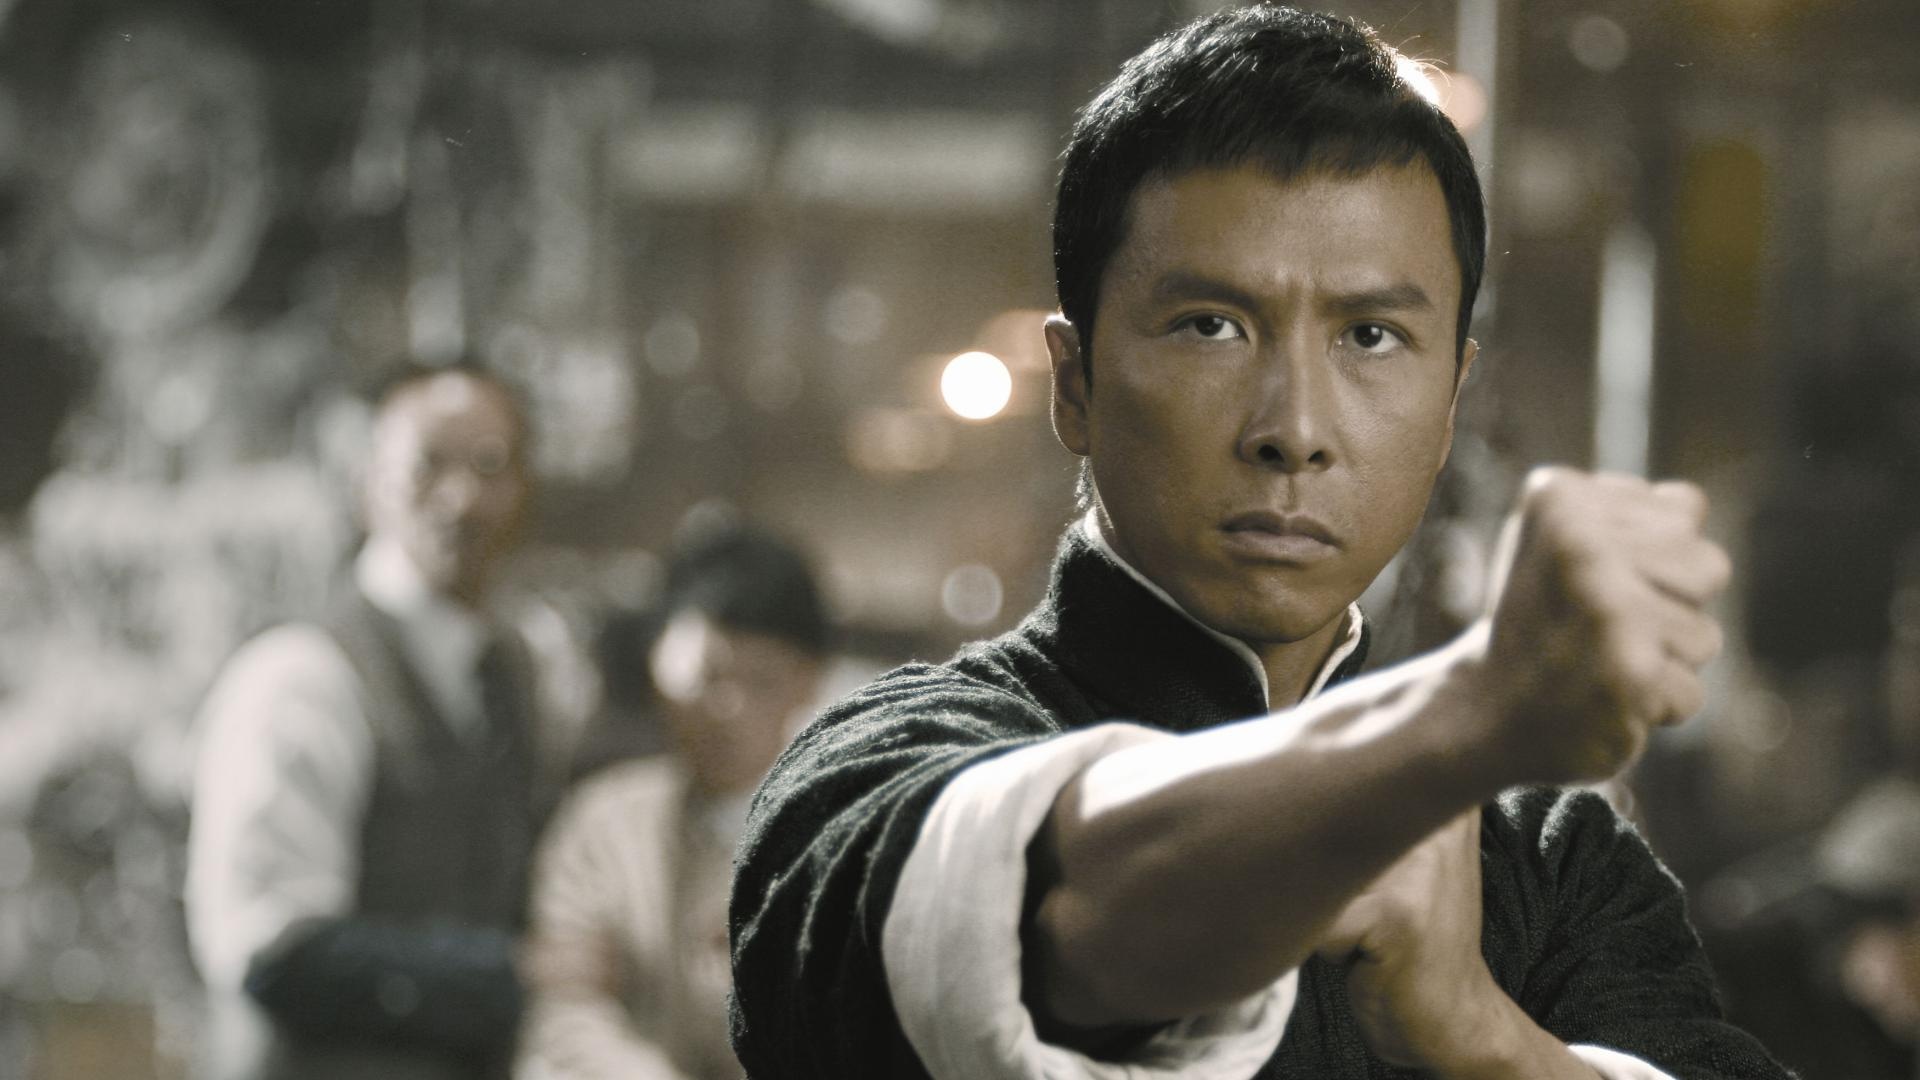 Ip Man: Donnie Yen, credited by many for contributing to the popularisation of Wing Chun in China. 1920x1080 Full HD Wallpaper.